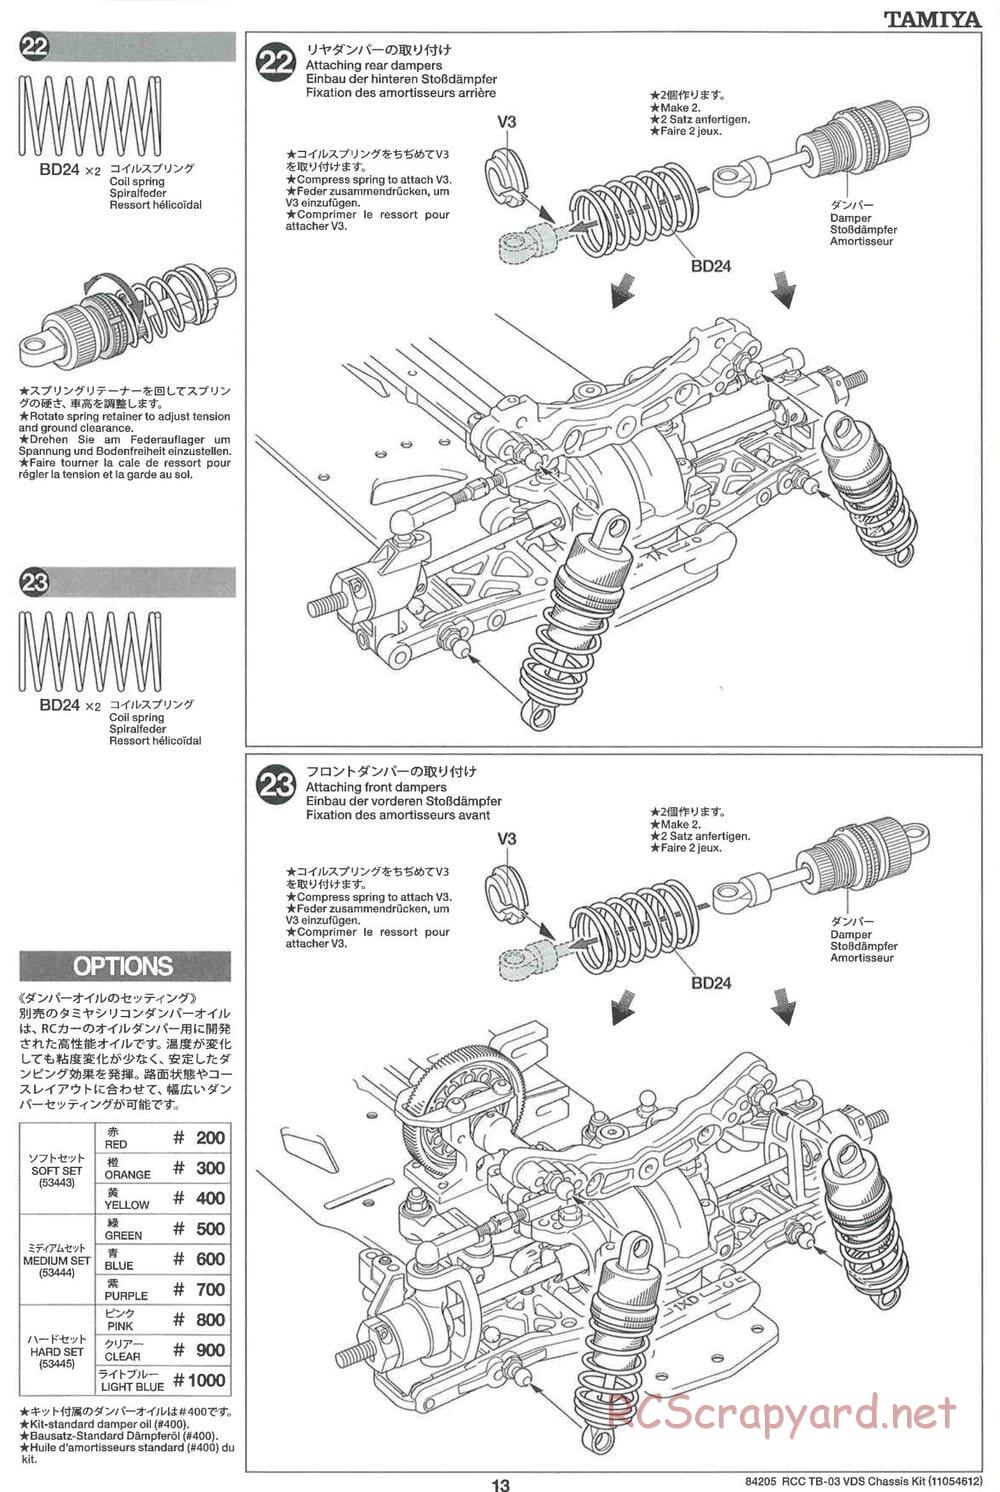 Tamiya - TB-03 VDS Drift Spec Chassis - Manual - Page 13